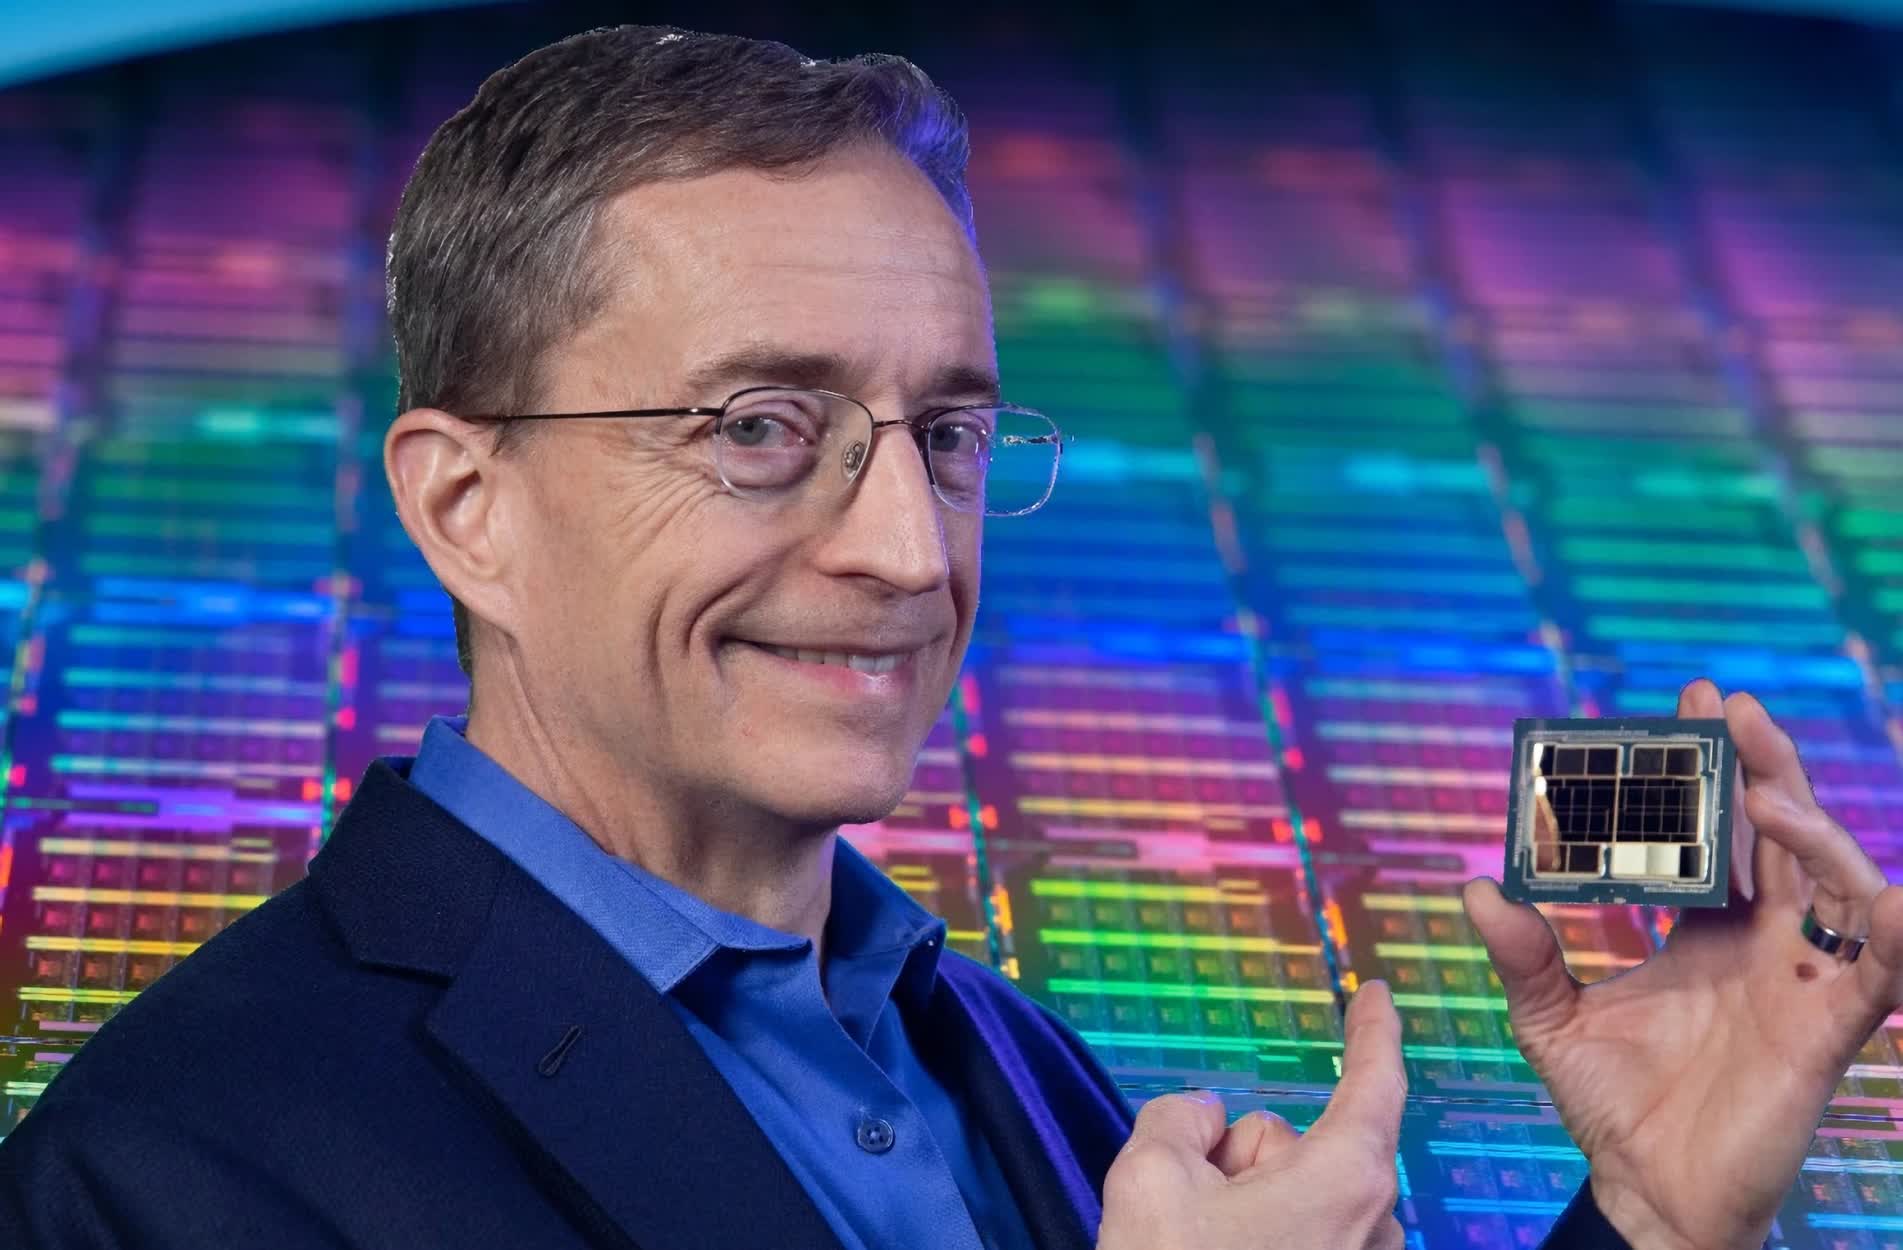 Intel CEO Pat Gelsinger visited Samsung to discuss potential collaboration